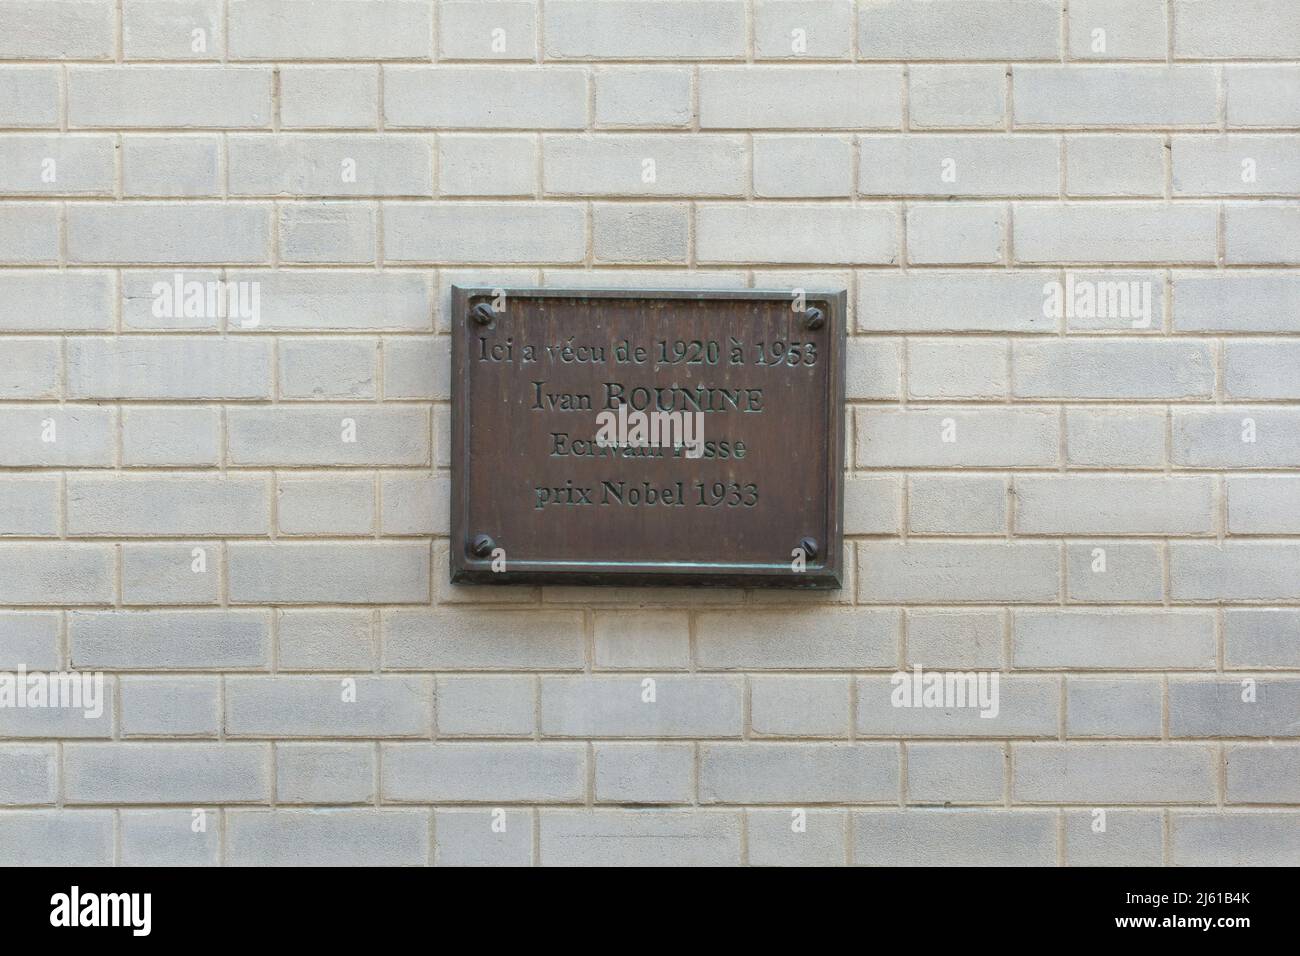 Commemorative plaque devoted to Russian novelist Ivan Bunin (1870-1953) at the house where he lived in exile from 1920 to 1953 in Rue Jacques Offenbach in Paris, France. Stock Photo